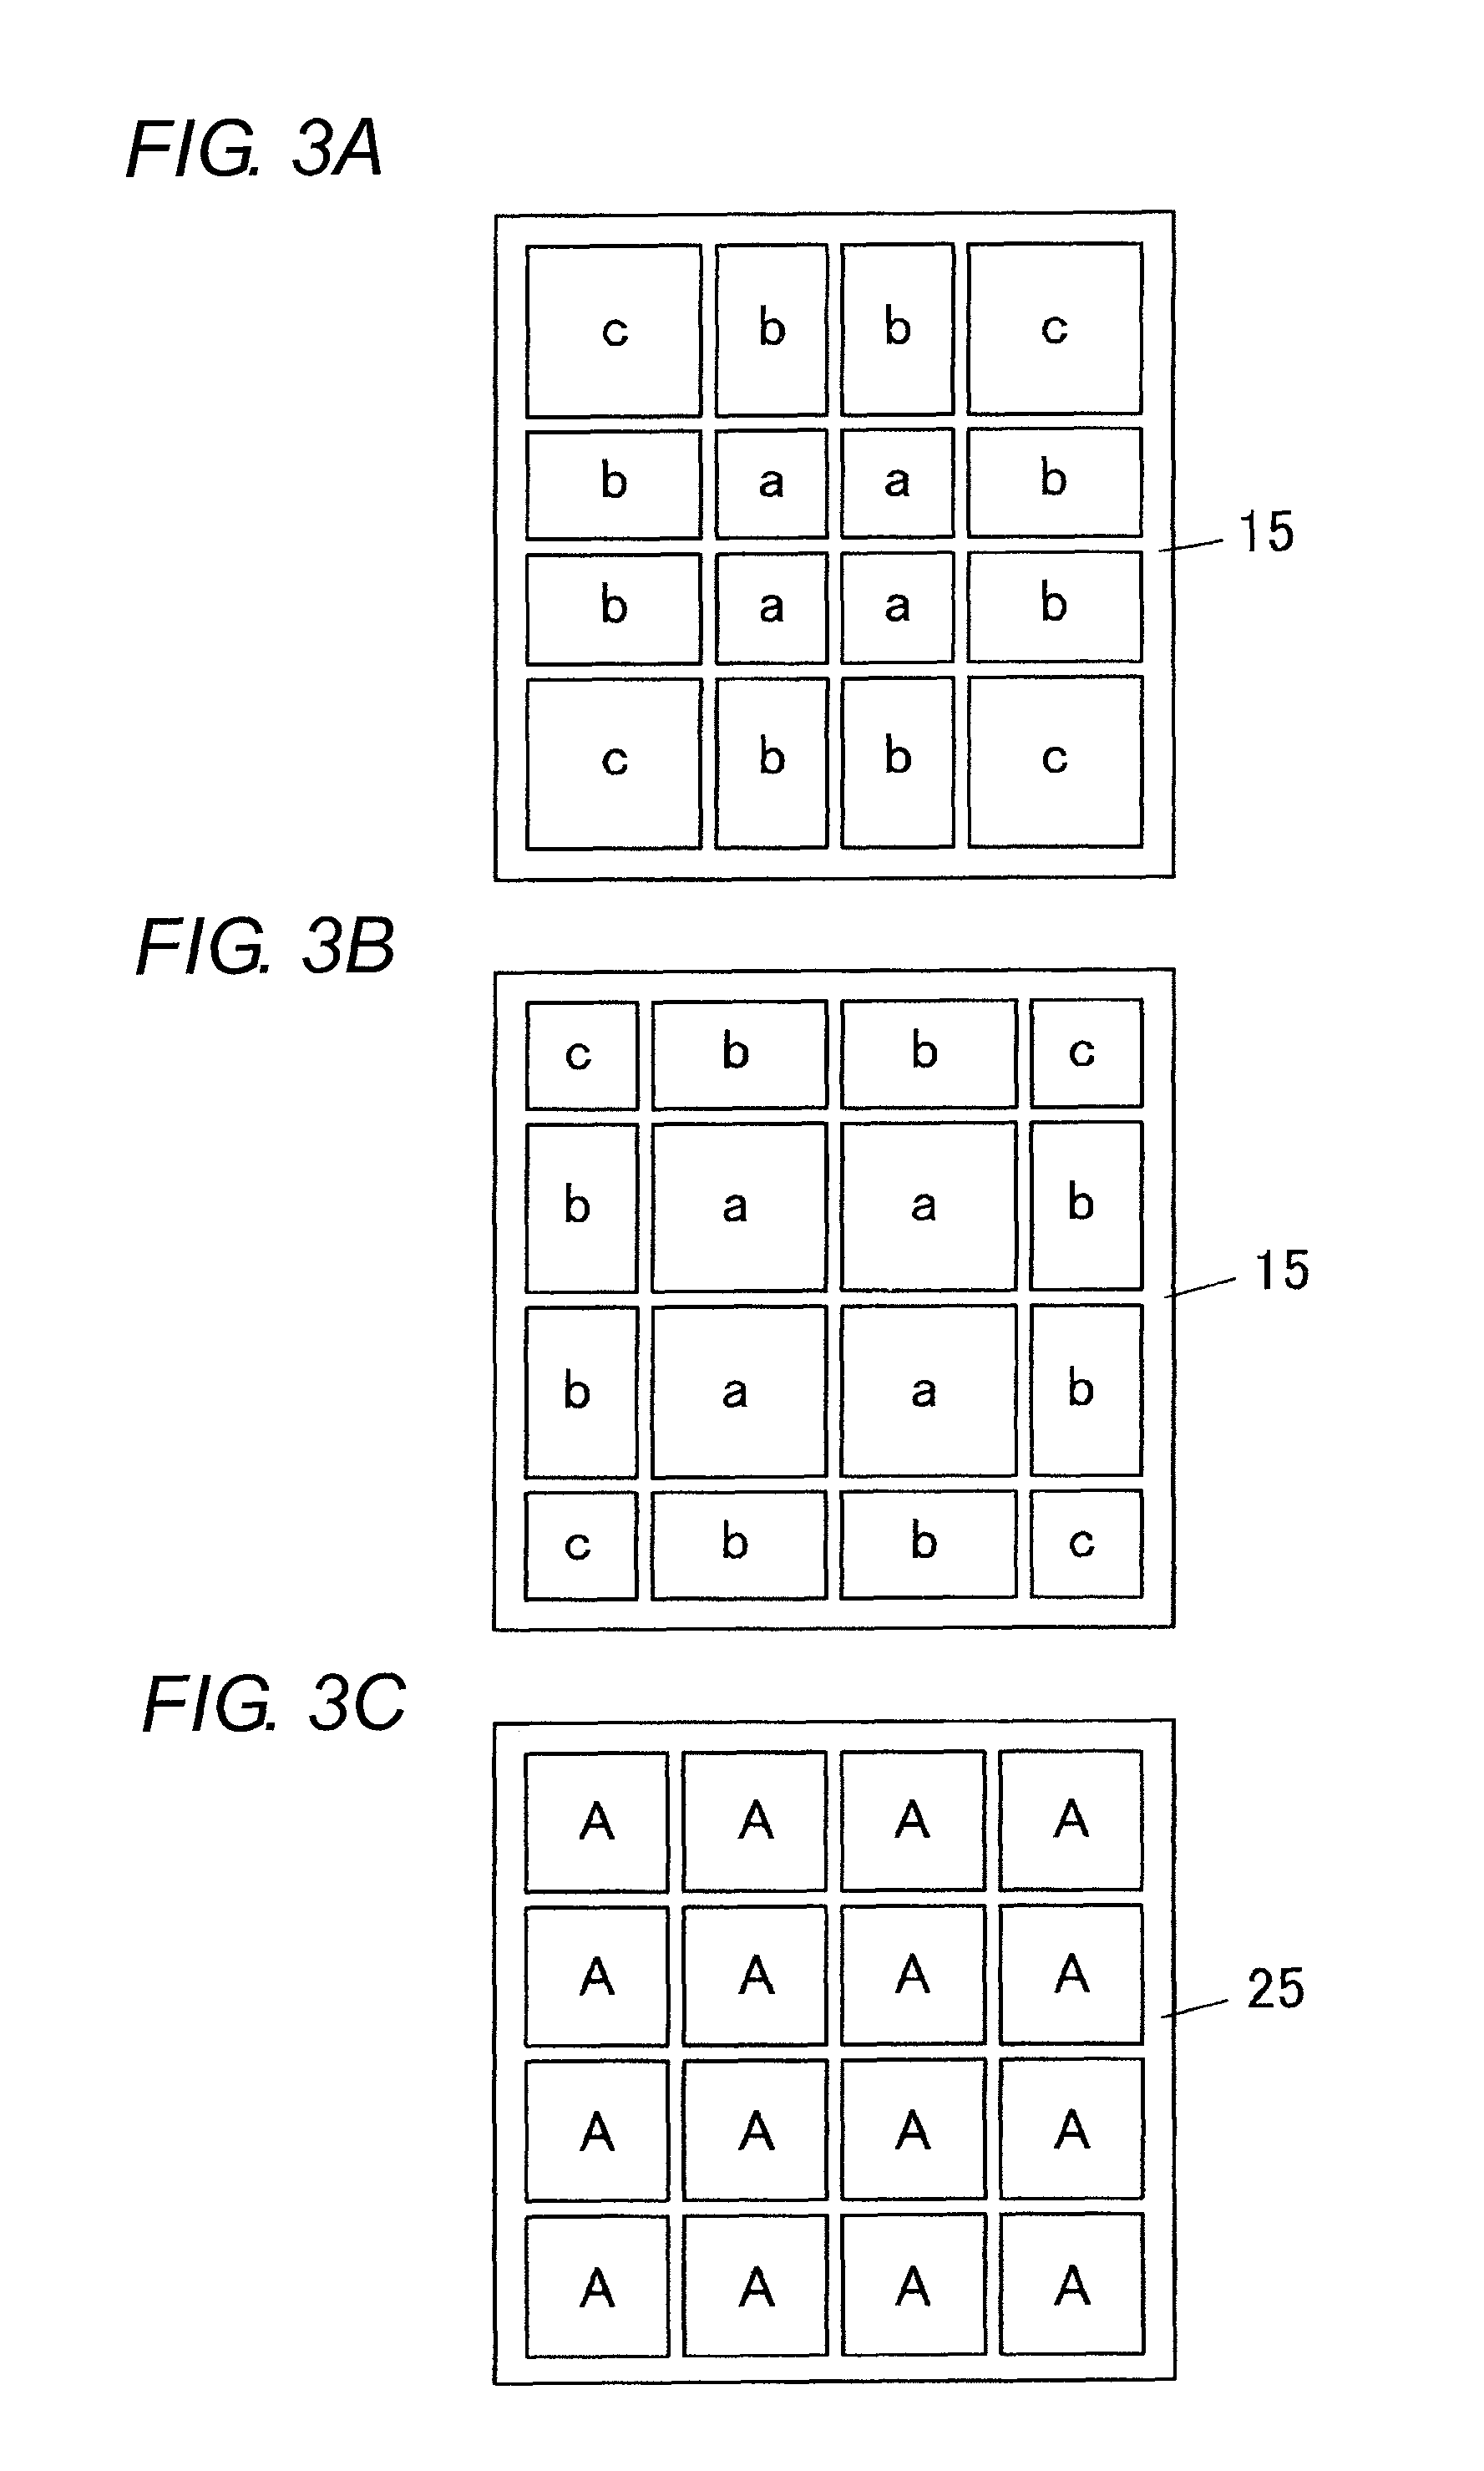 Optical coupler having first and second terminal boards and first and second conversion elements